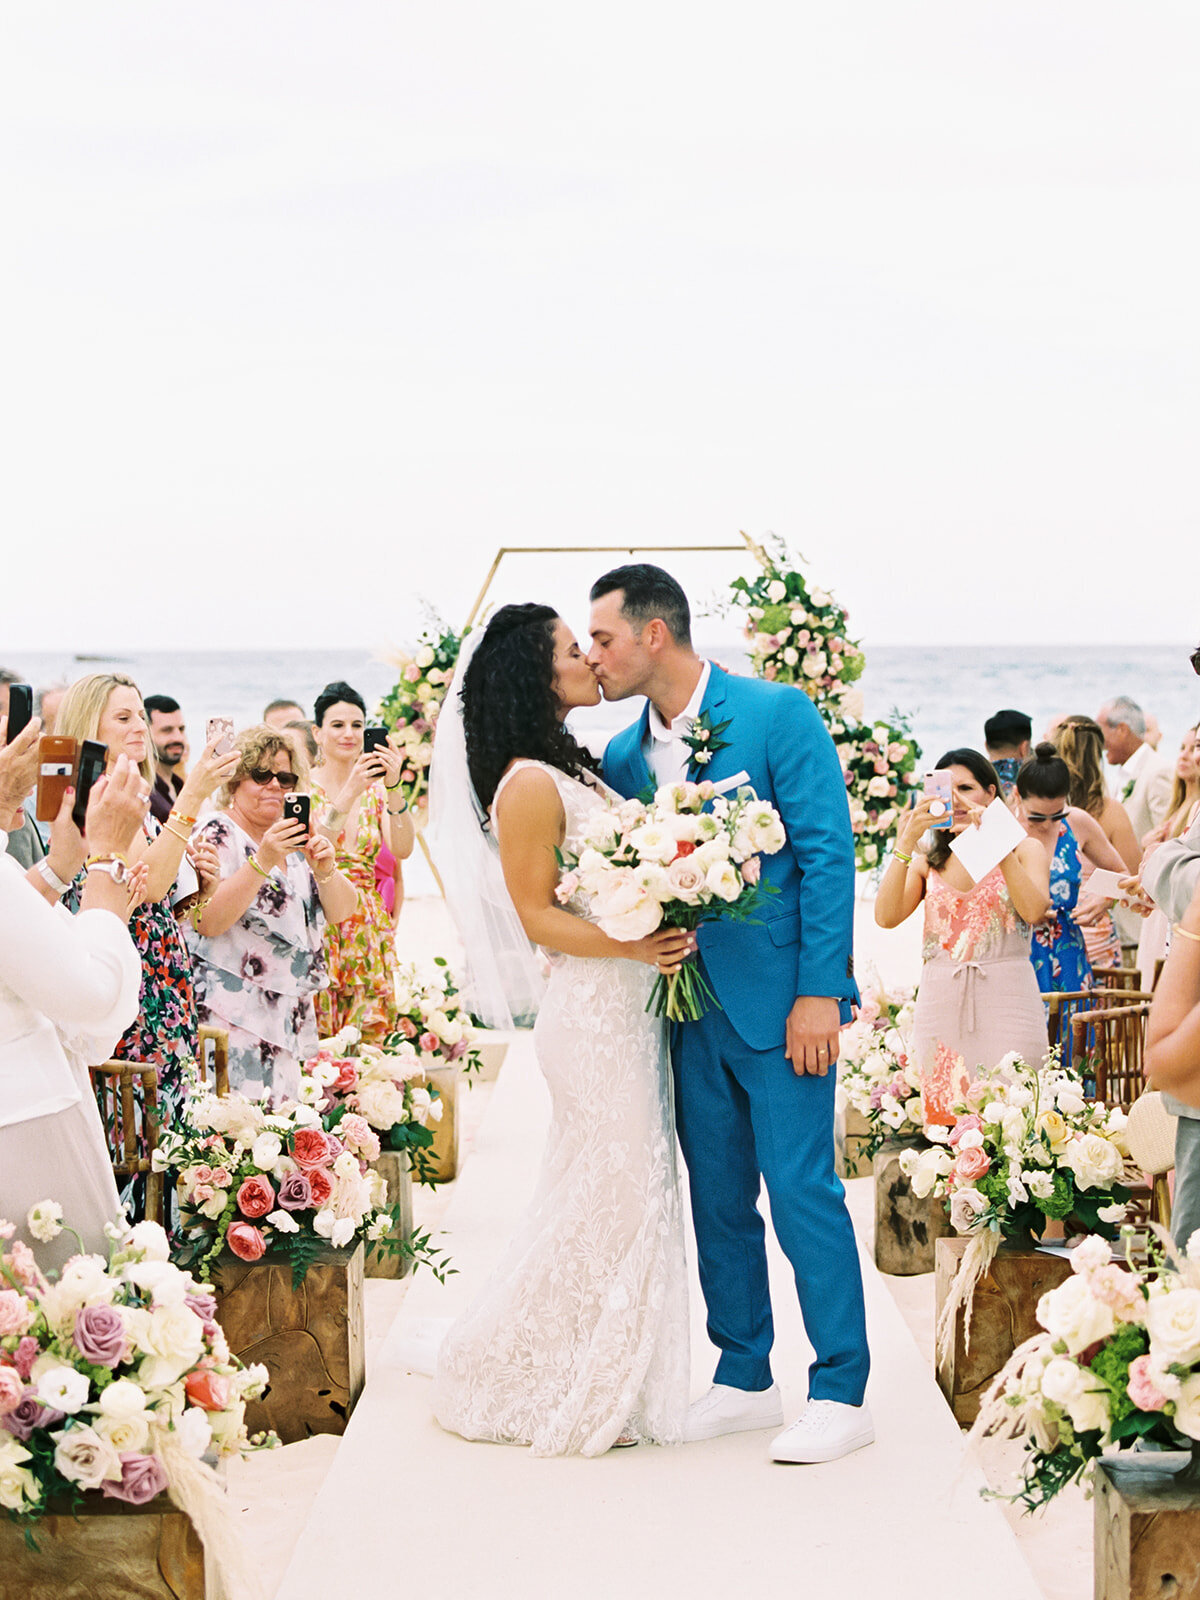 Punta Cana Wedding by Claire Duran